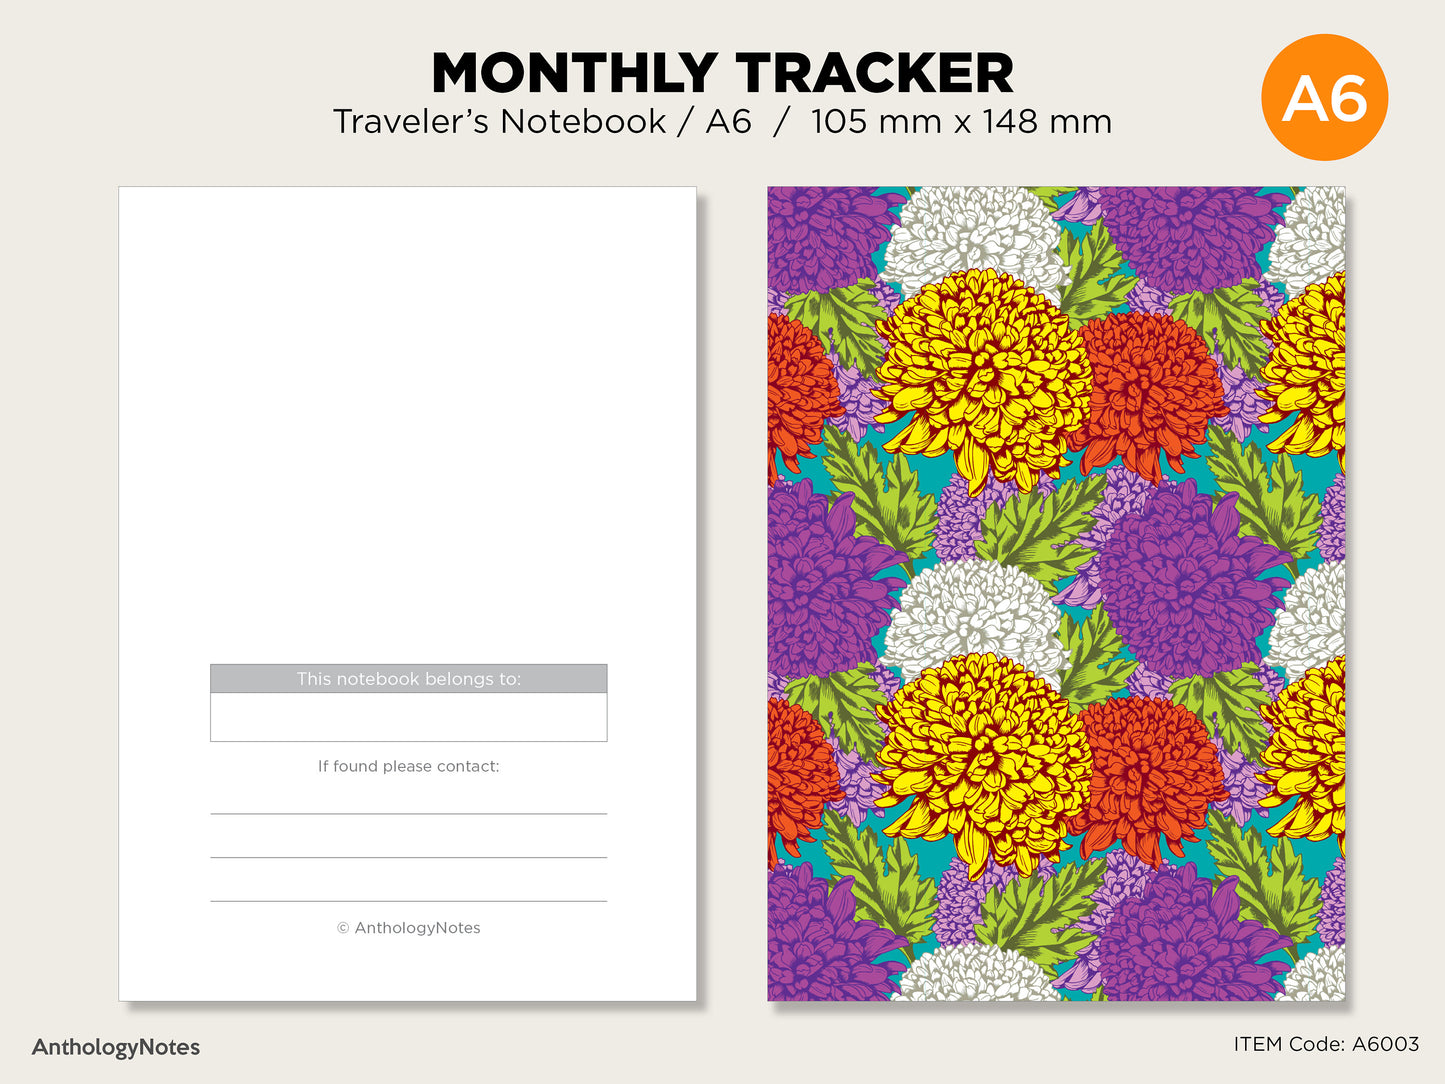 A6 Size Monthly Tracker Grid - Printable Traveler's Notebook Planner Insert